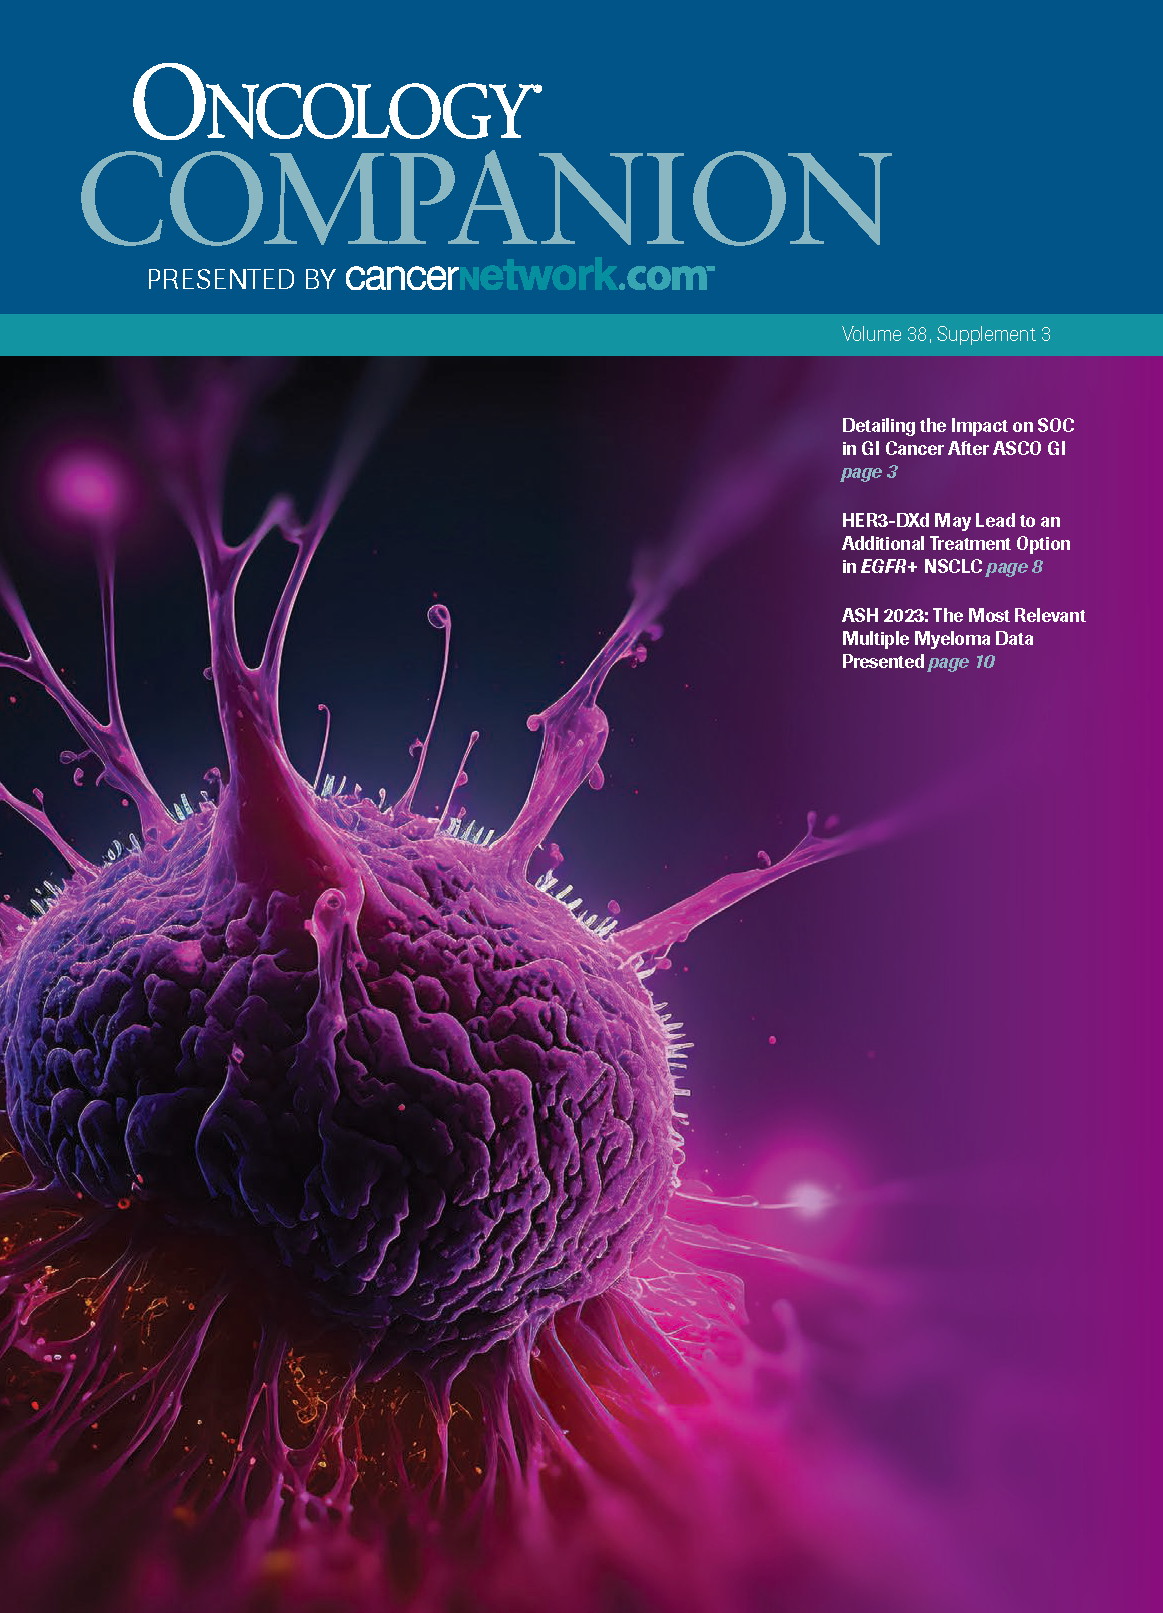 ONCOLOGY® Companion, Volume 38, Supplement 3